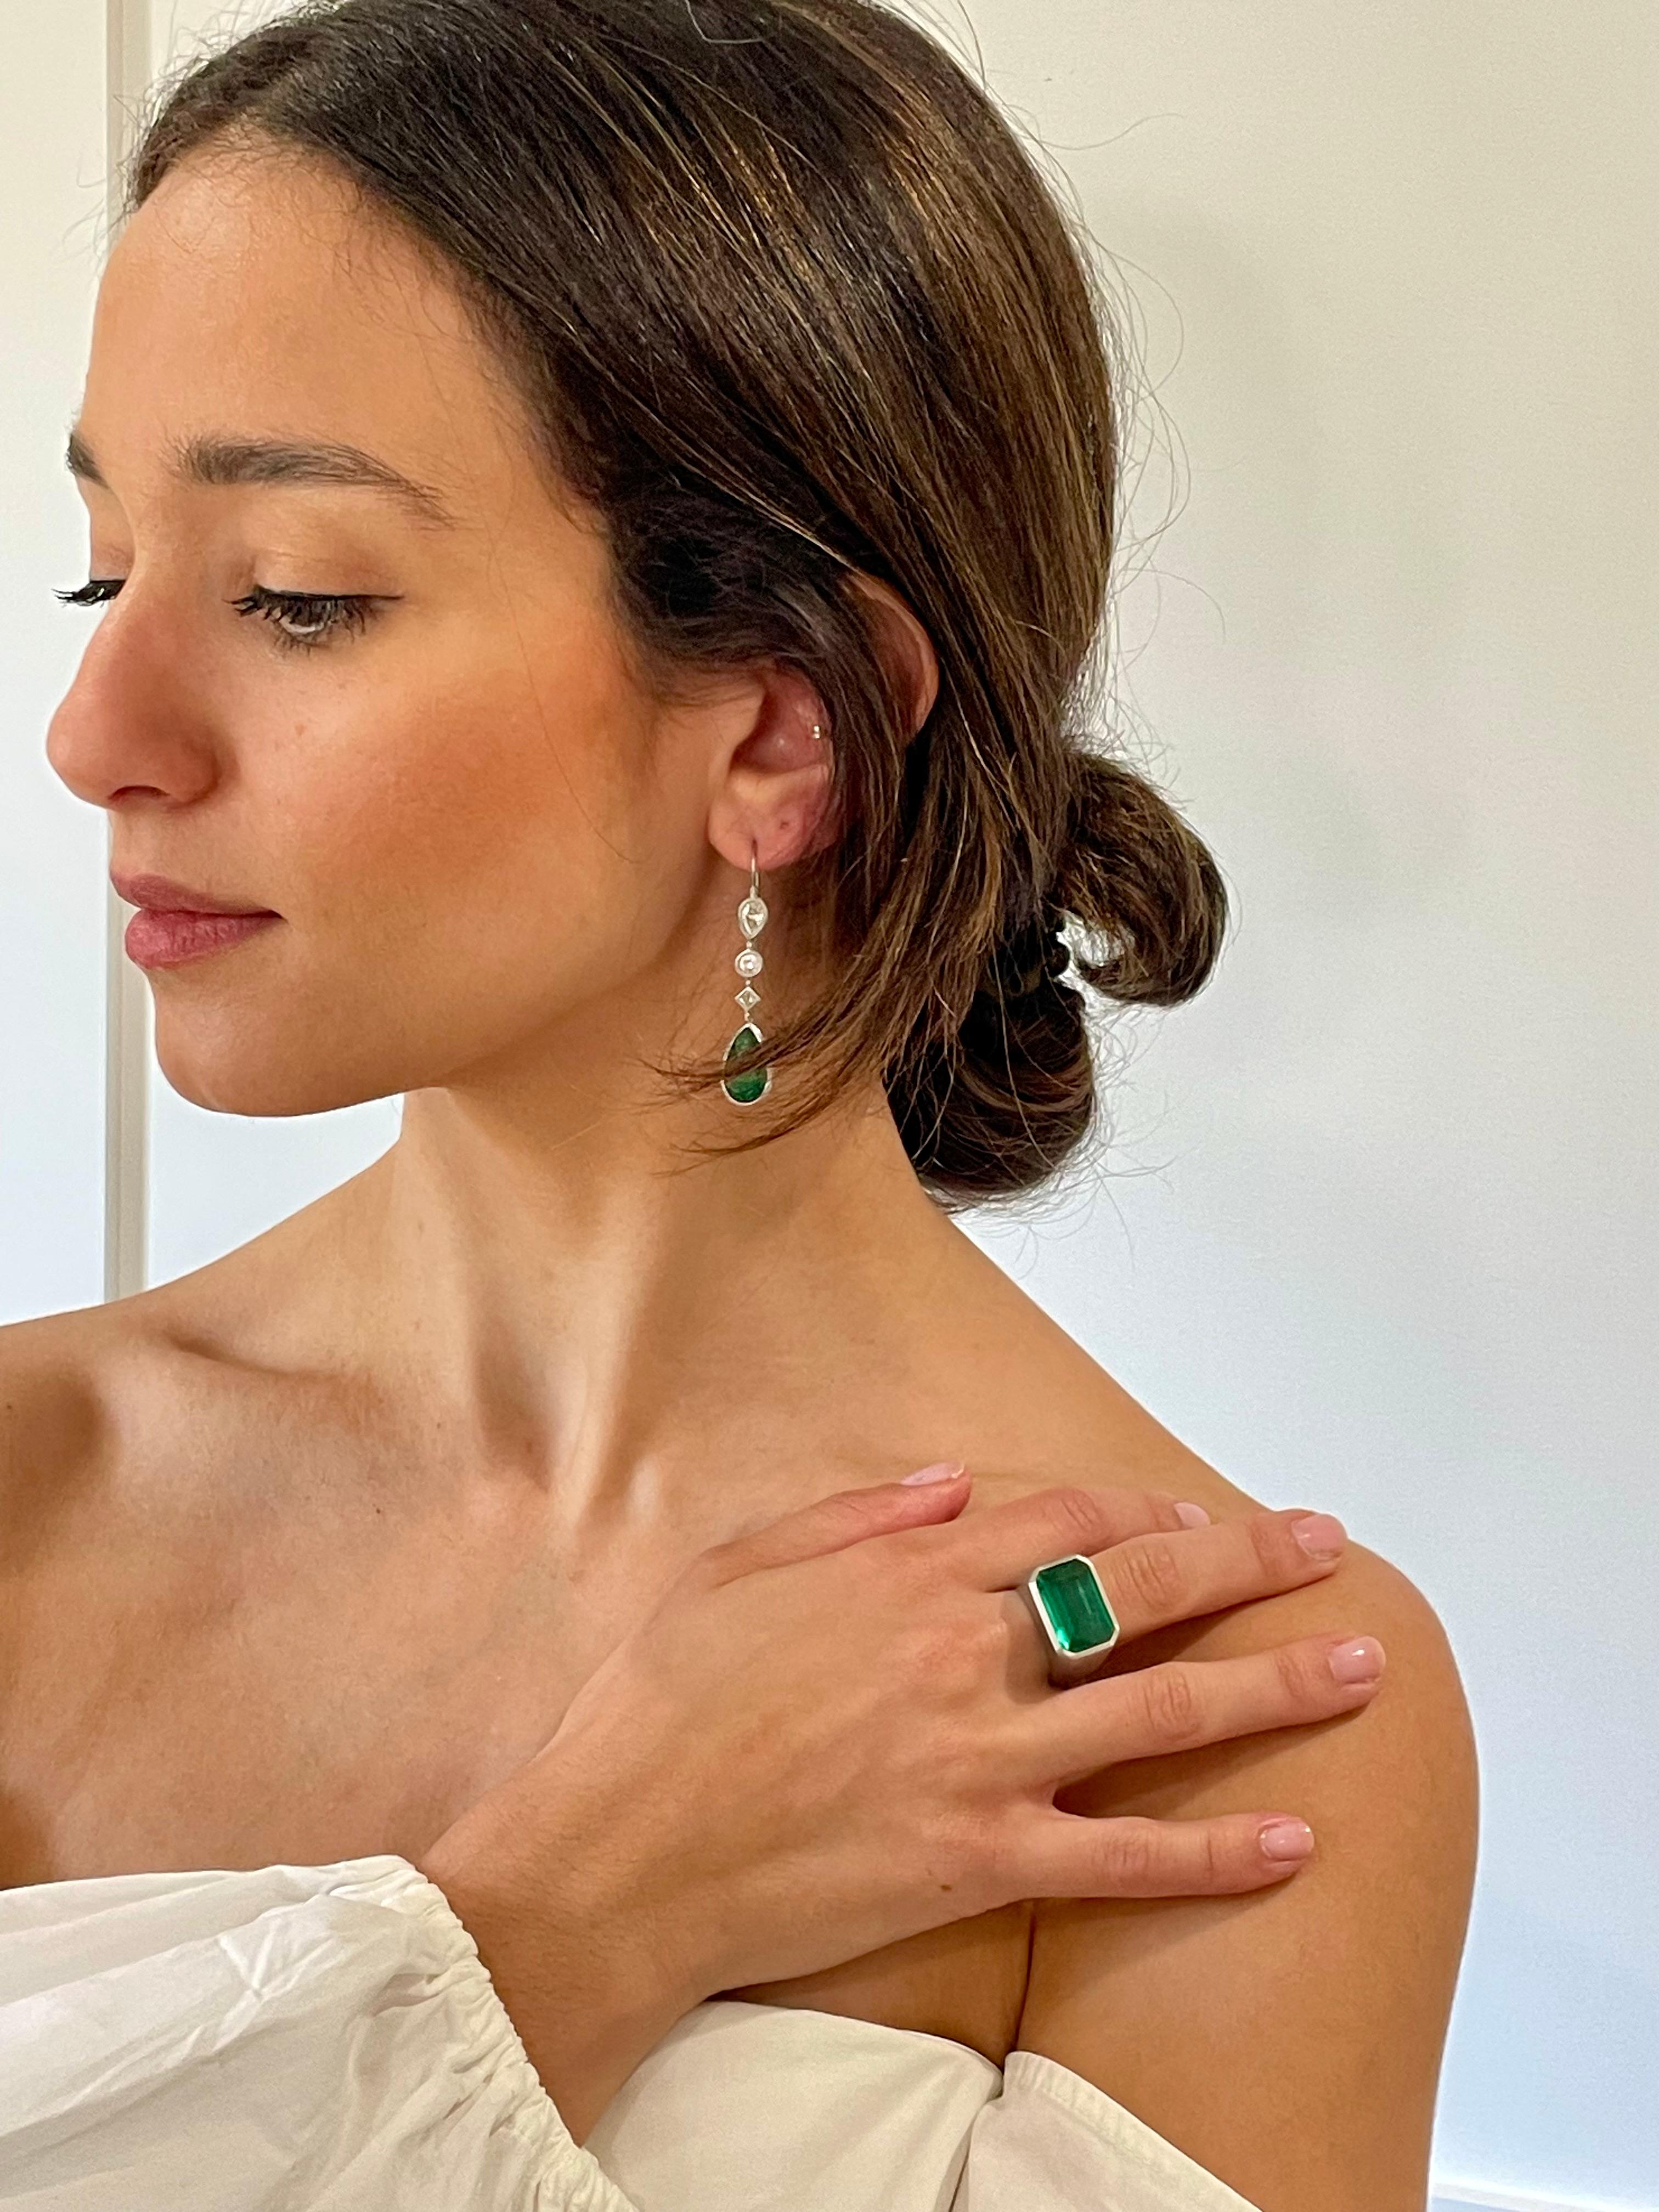 Faye Kim's one-of-a-kind Platinum Pear Shape Emerald Diamond Earrings comprise bright and beautiful twin emeralds each paired with a line of striking white diamonds in various shapes. The statement-making set is simultaneously classic and timeless